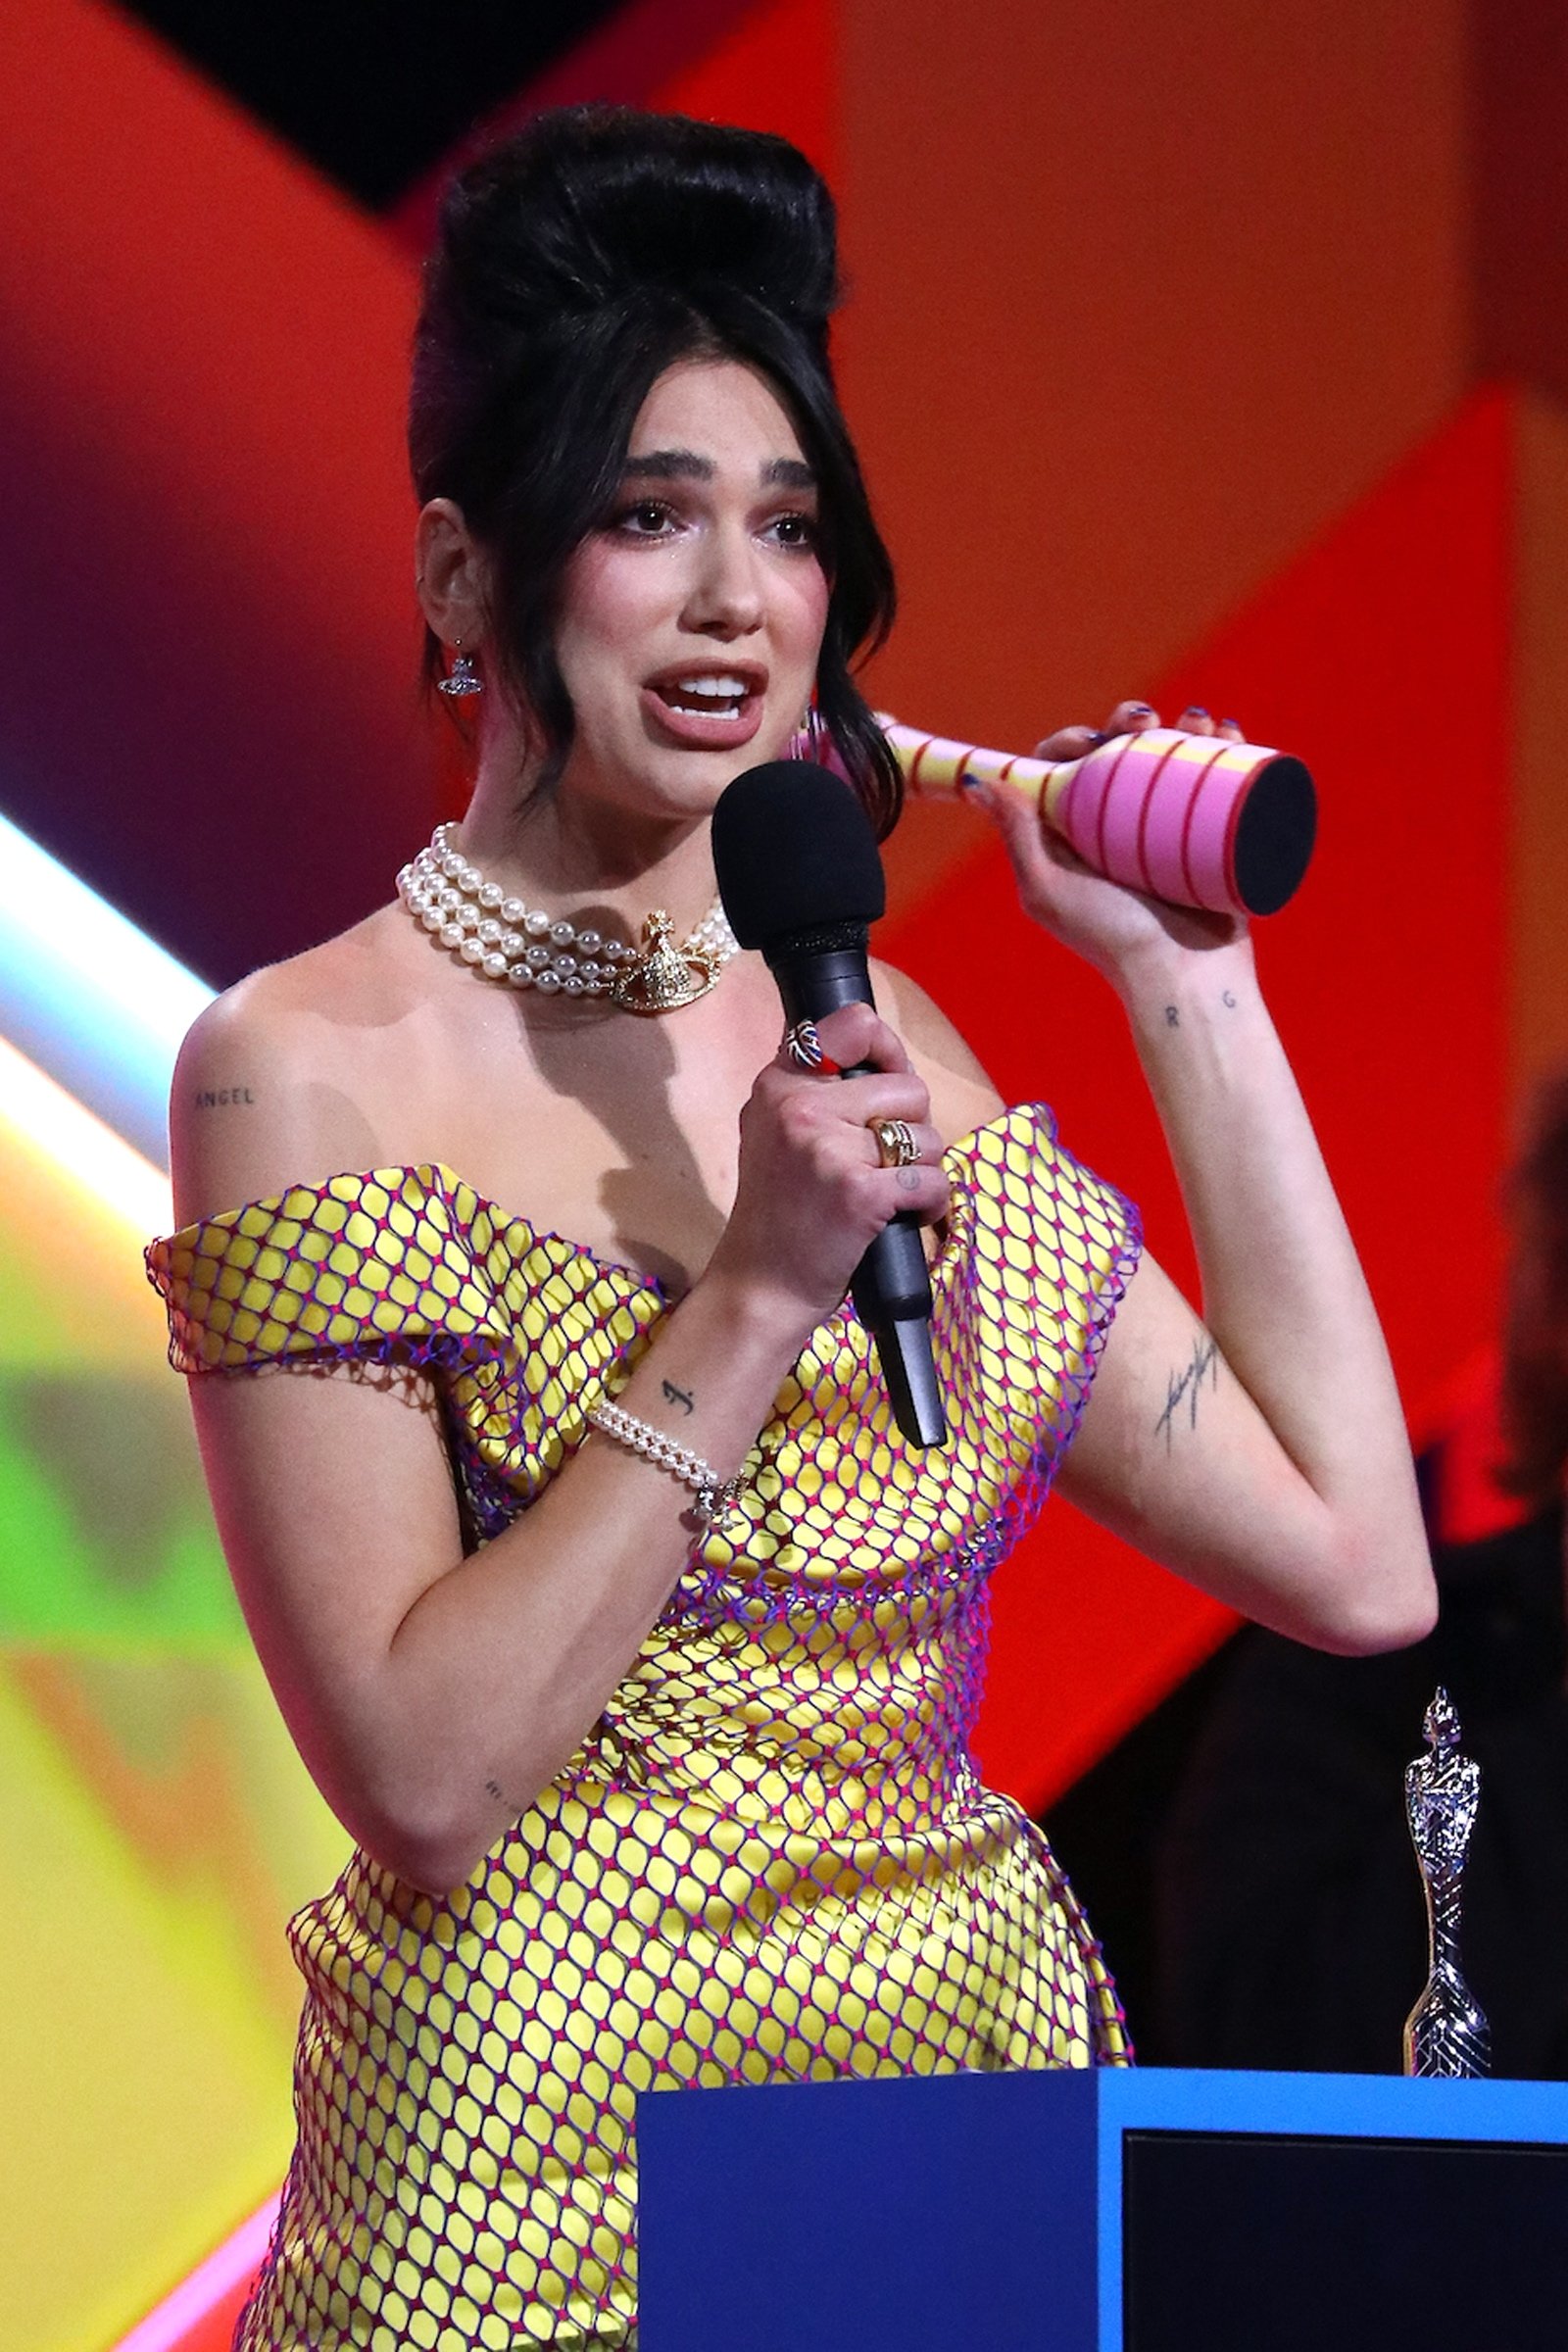 A handout photo made available by the Brit Awards shows Dua Lipa at the Brit Awards 2021 at the O2 Arena in Greenwich, Greater London, Britain, 11 May 2021. (EPA Photo)